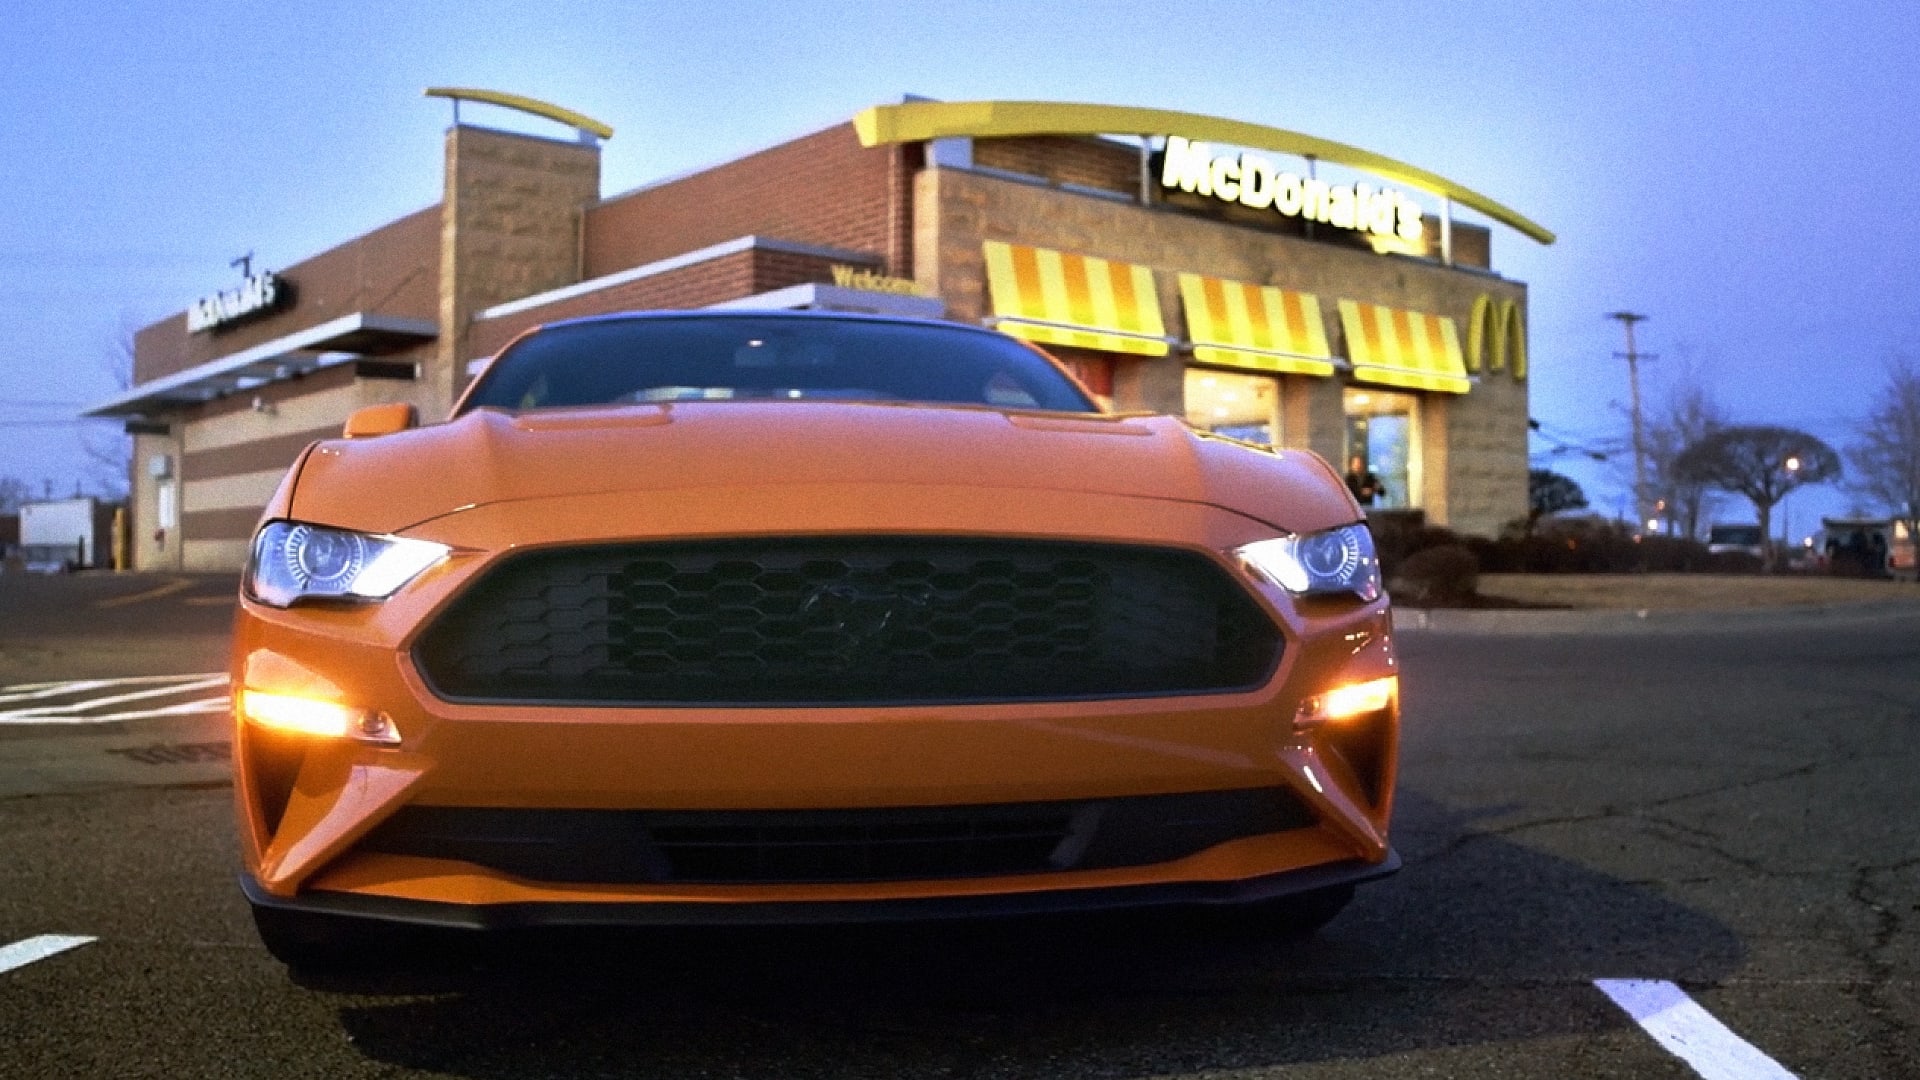 Ford and McDonald’s are building car parts together. Wait, what?